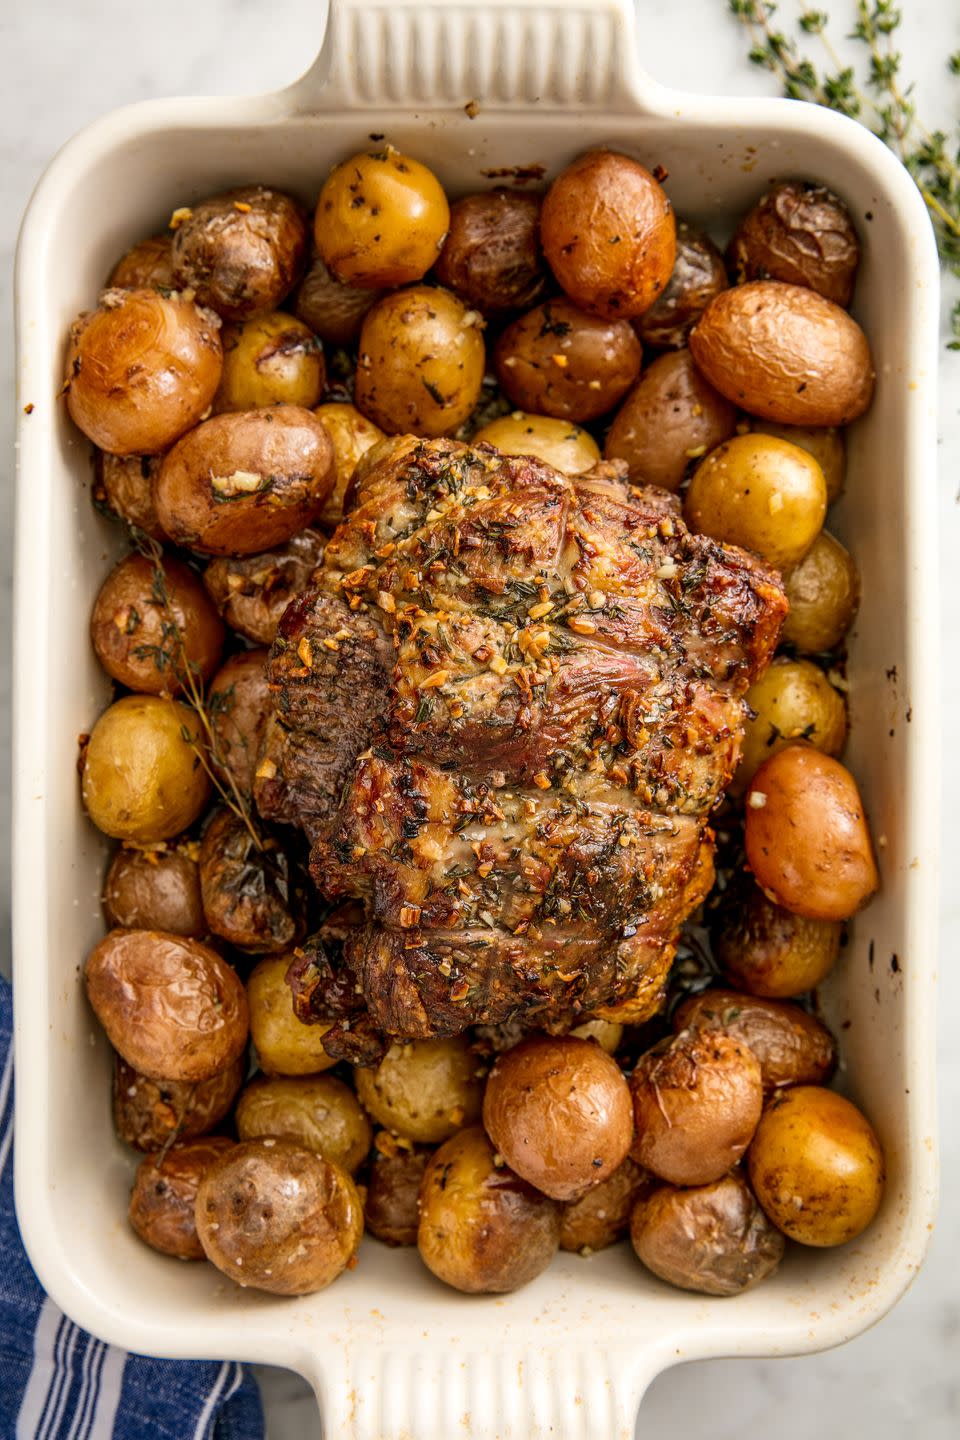 <p>A beautiful roast worthy of your Christmas dinner.</p><p>Get the recipe from <a href="https://www.delish.com/cooking/recipe-ideas/recipes/a56354/best-roast-lamb-recipe/" rel="nofollow noopener" target="_blank" data-ylk="slk:Delish" class="link rapid-noclick-resp">Delish</a>. </p>